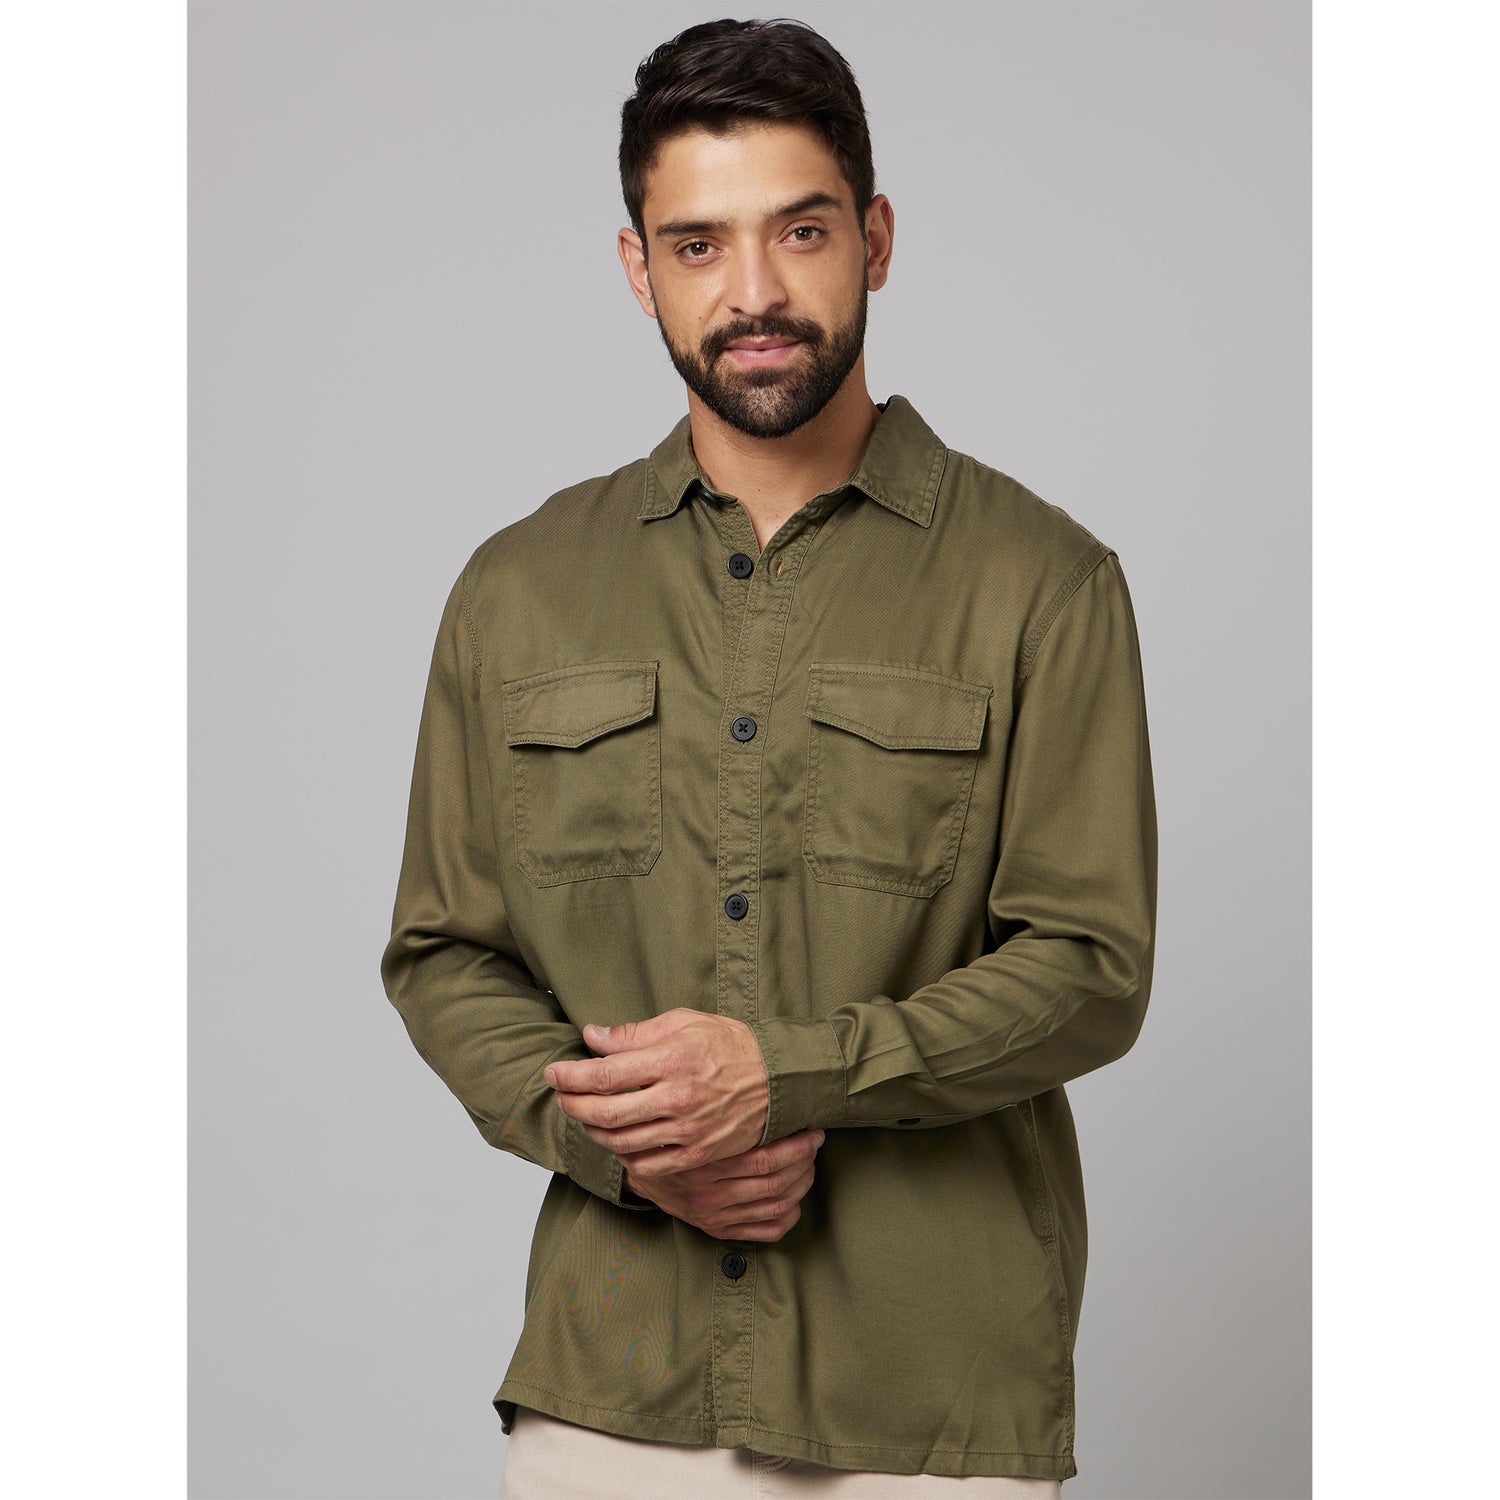 Green Classic Relaxed Fit Solid Cotton Casual Shirt (BAOVERWAR)